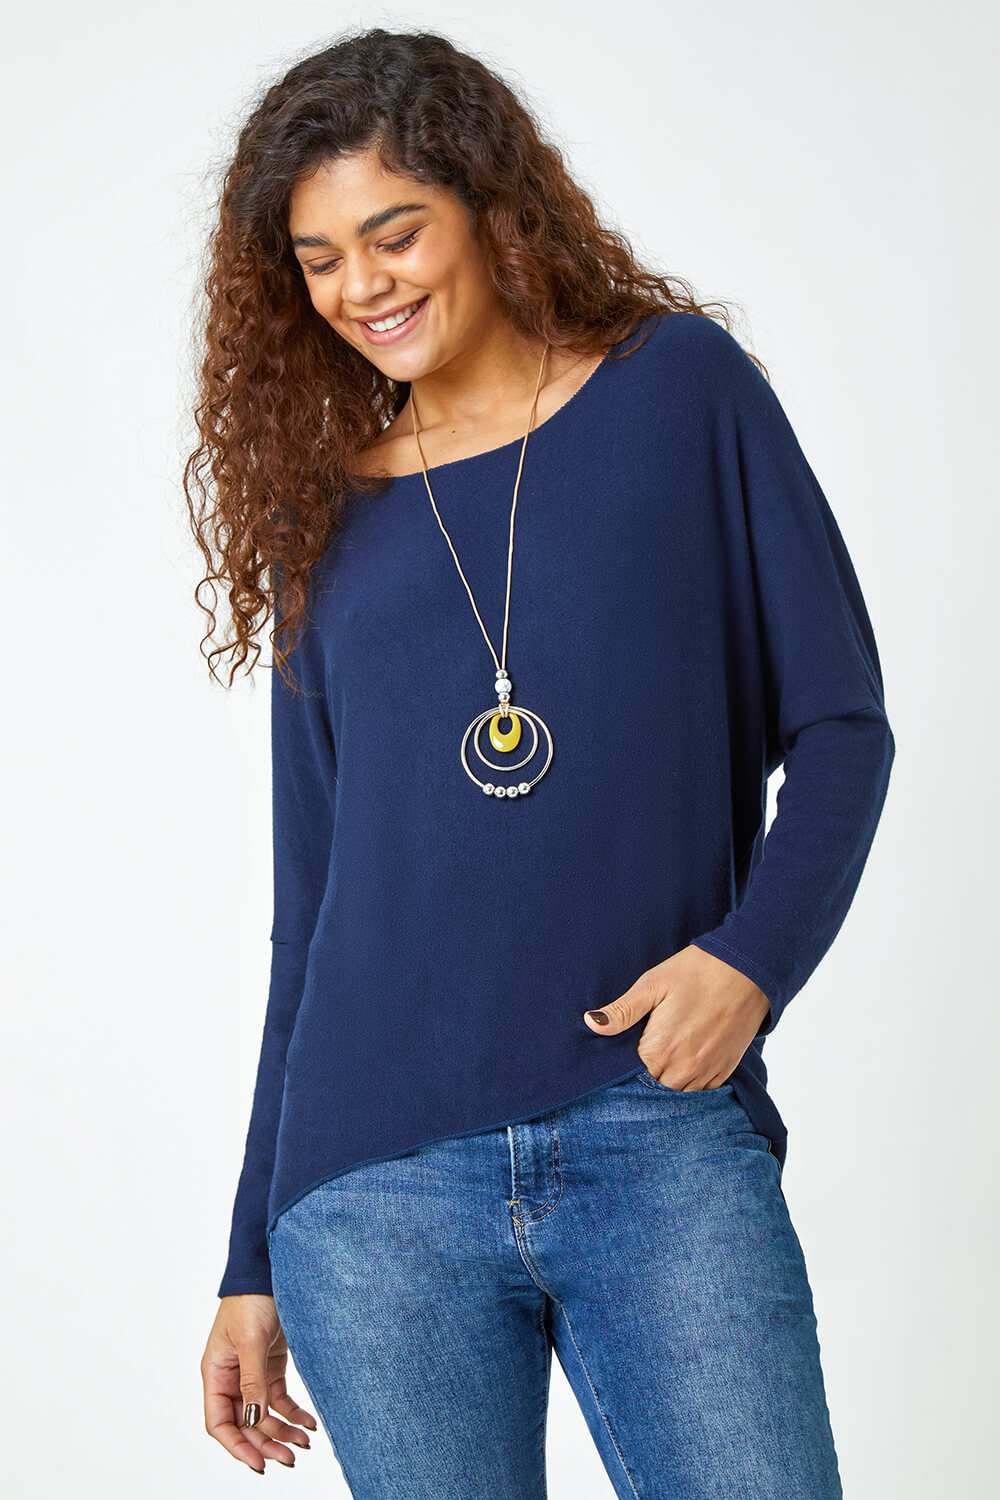 Necklace Detail Stretch Knit Top